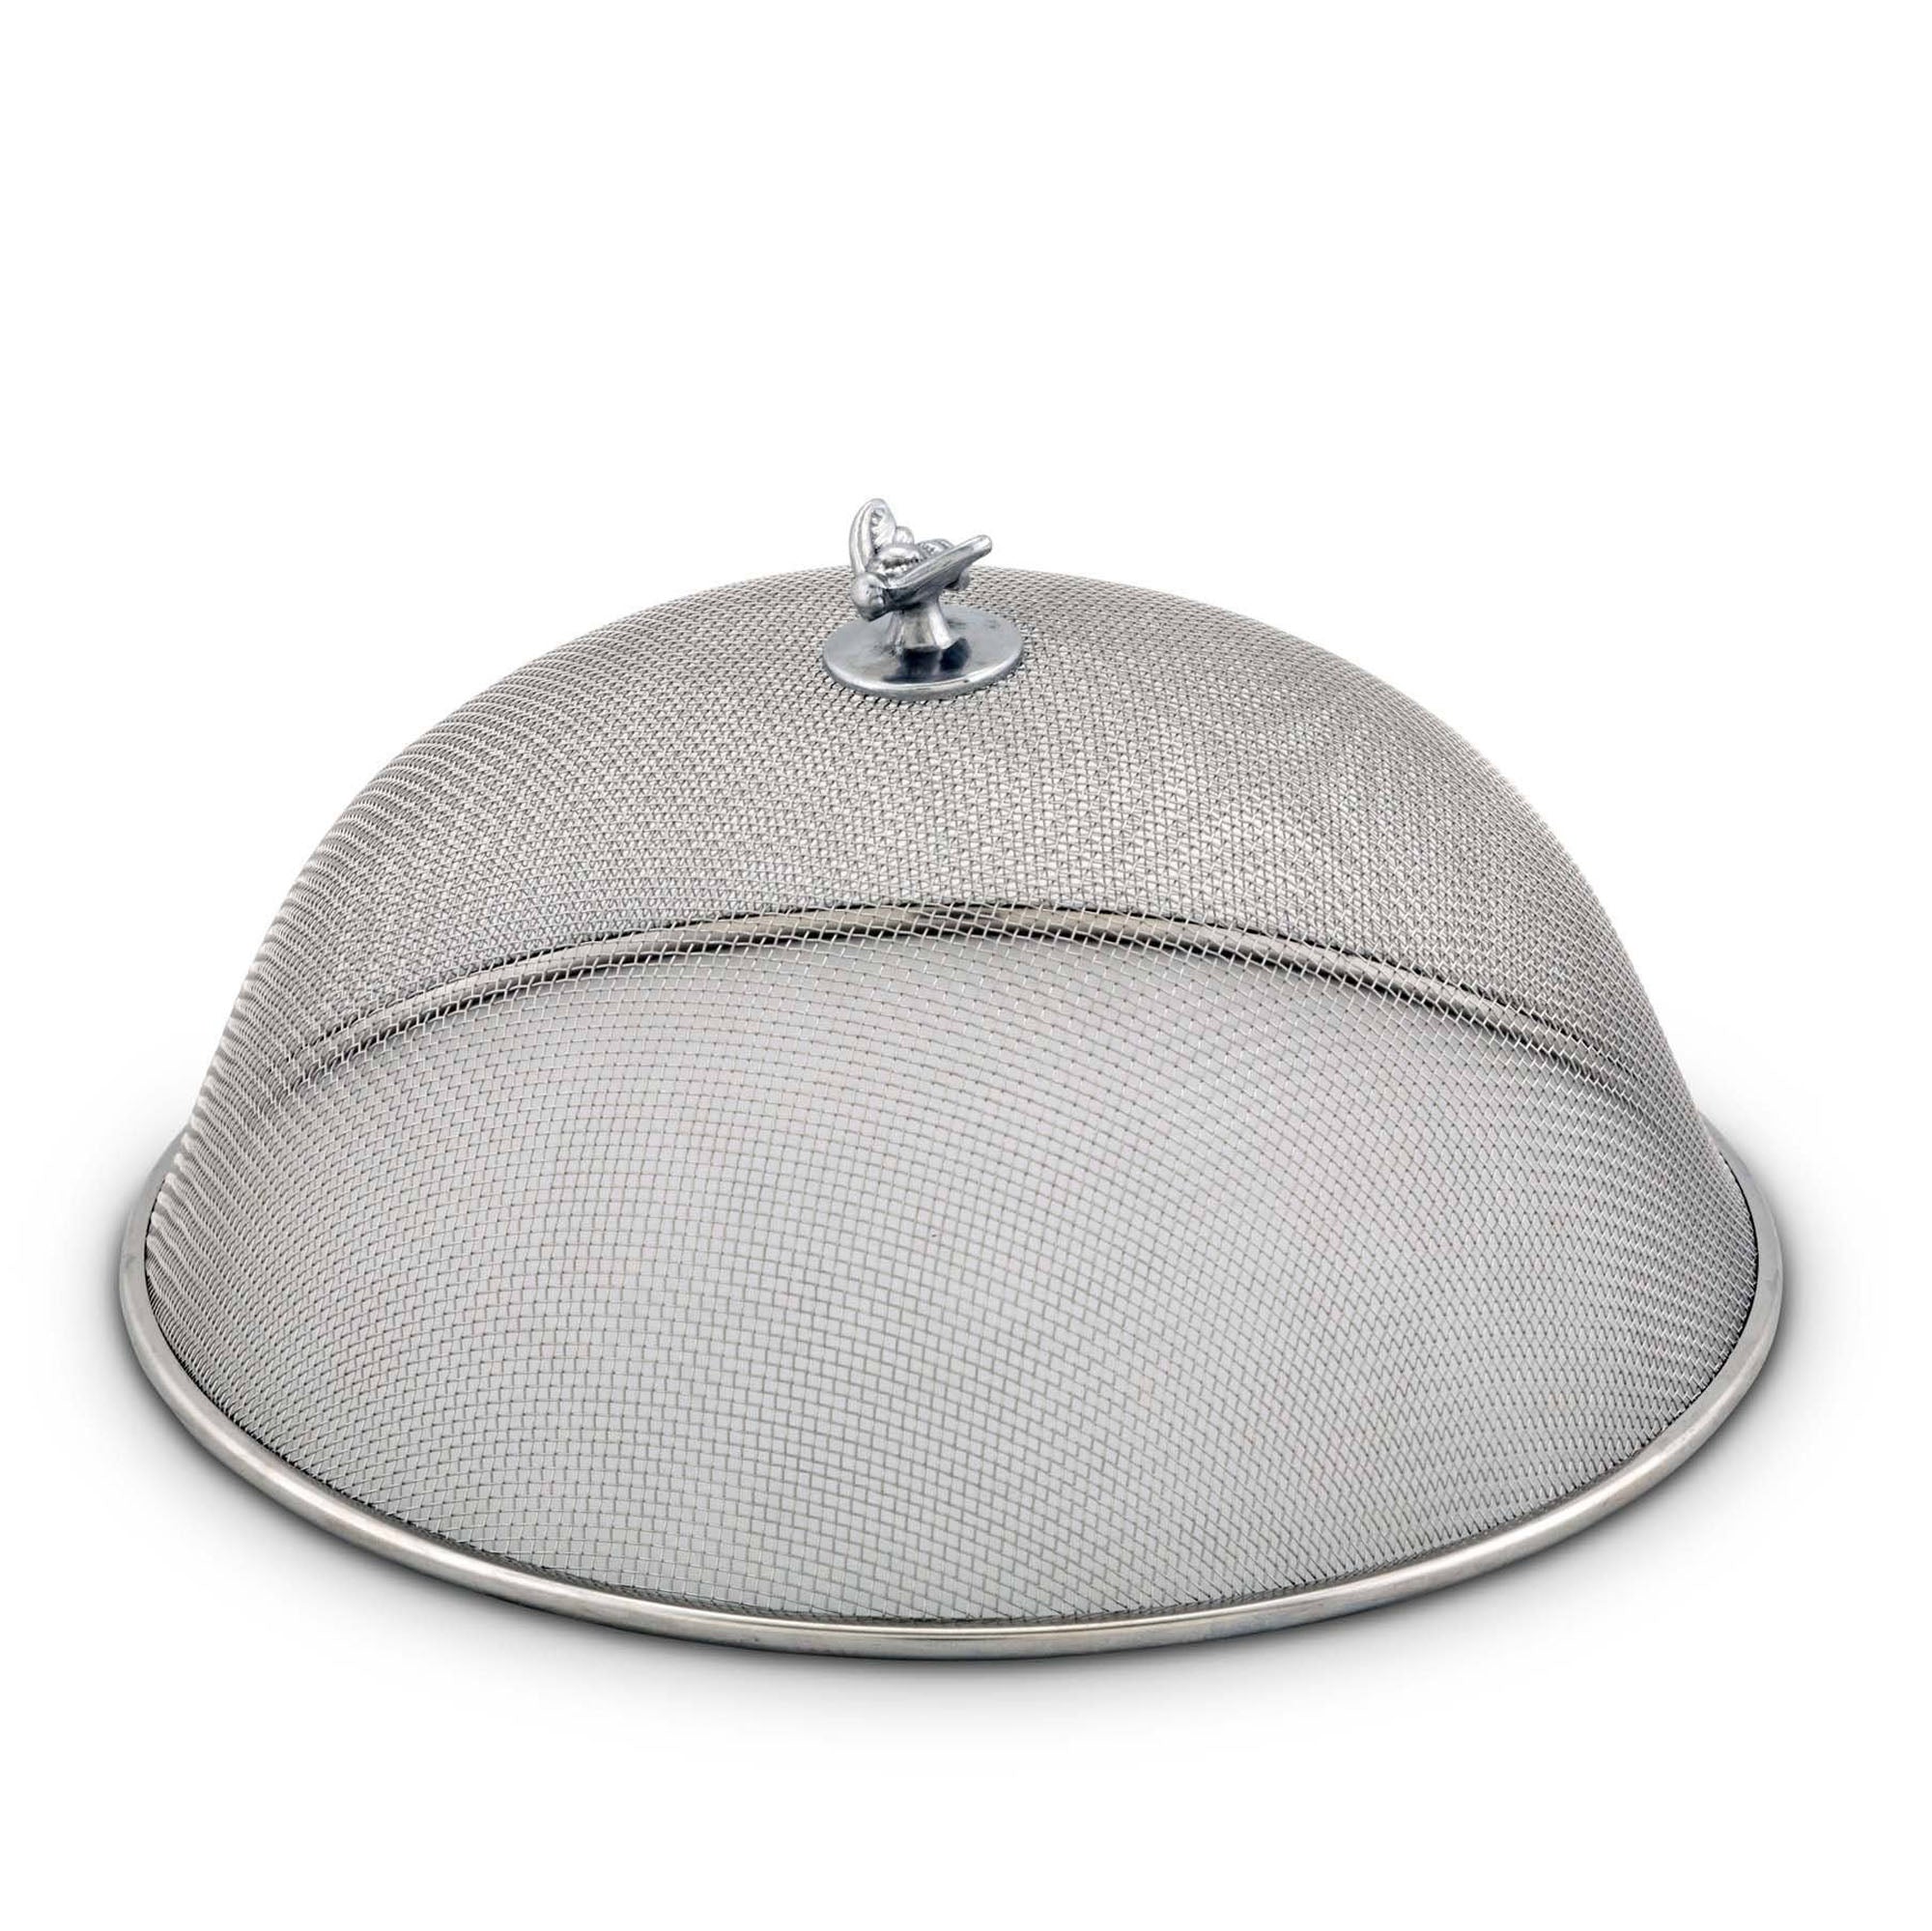 Arthur Court Bee Stainless Mesh Picnic Cover Product Image